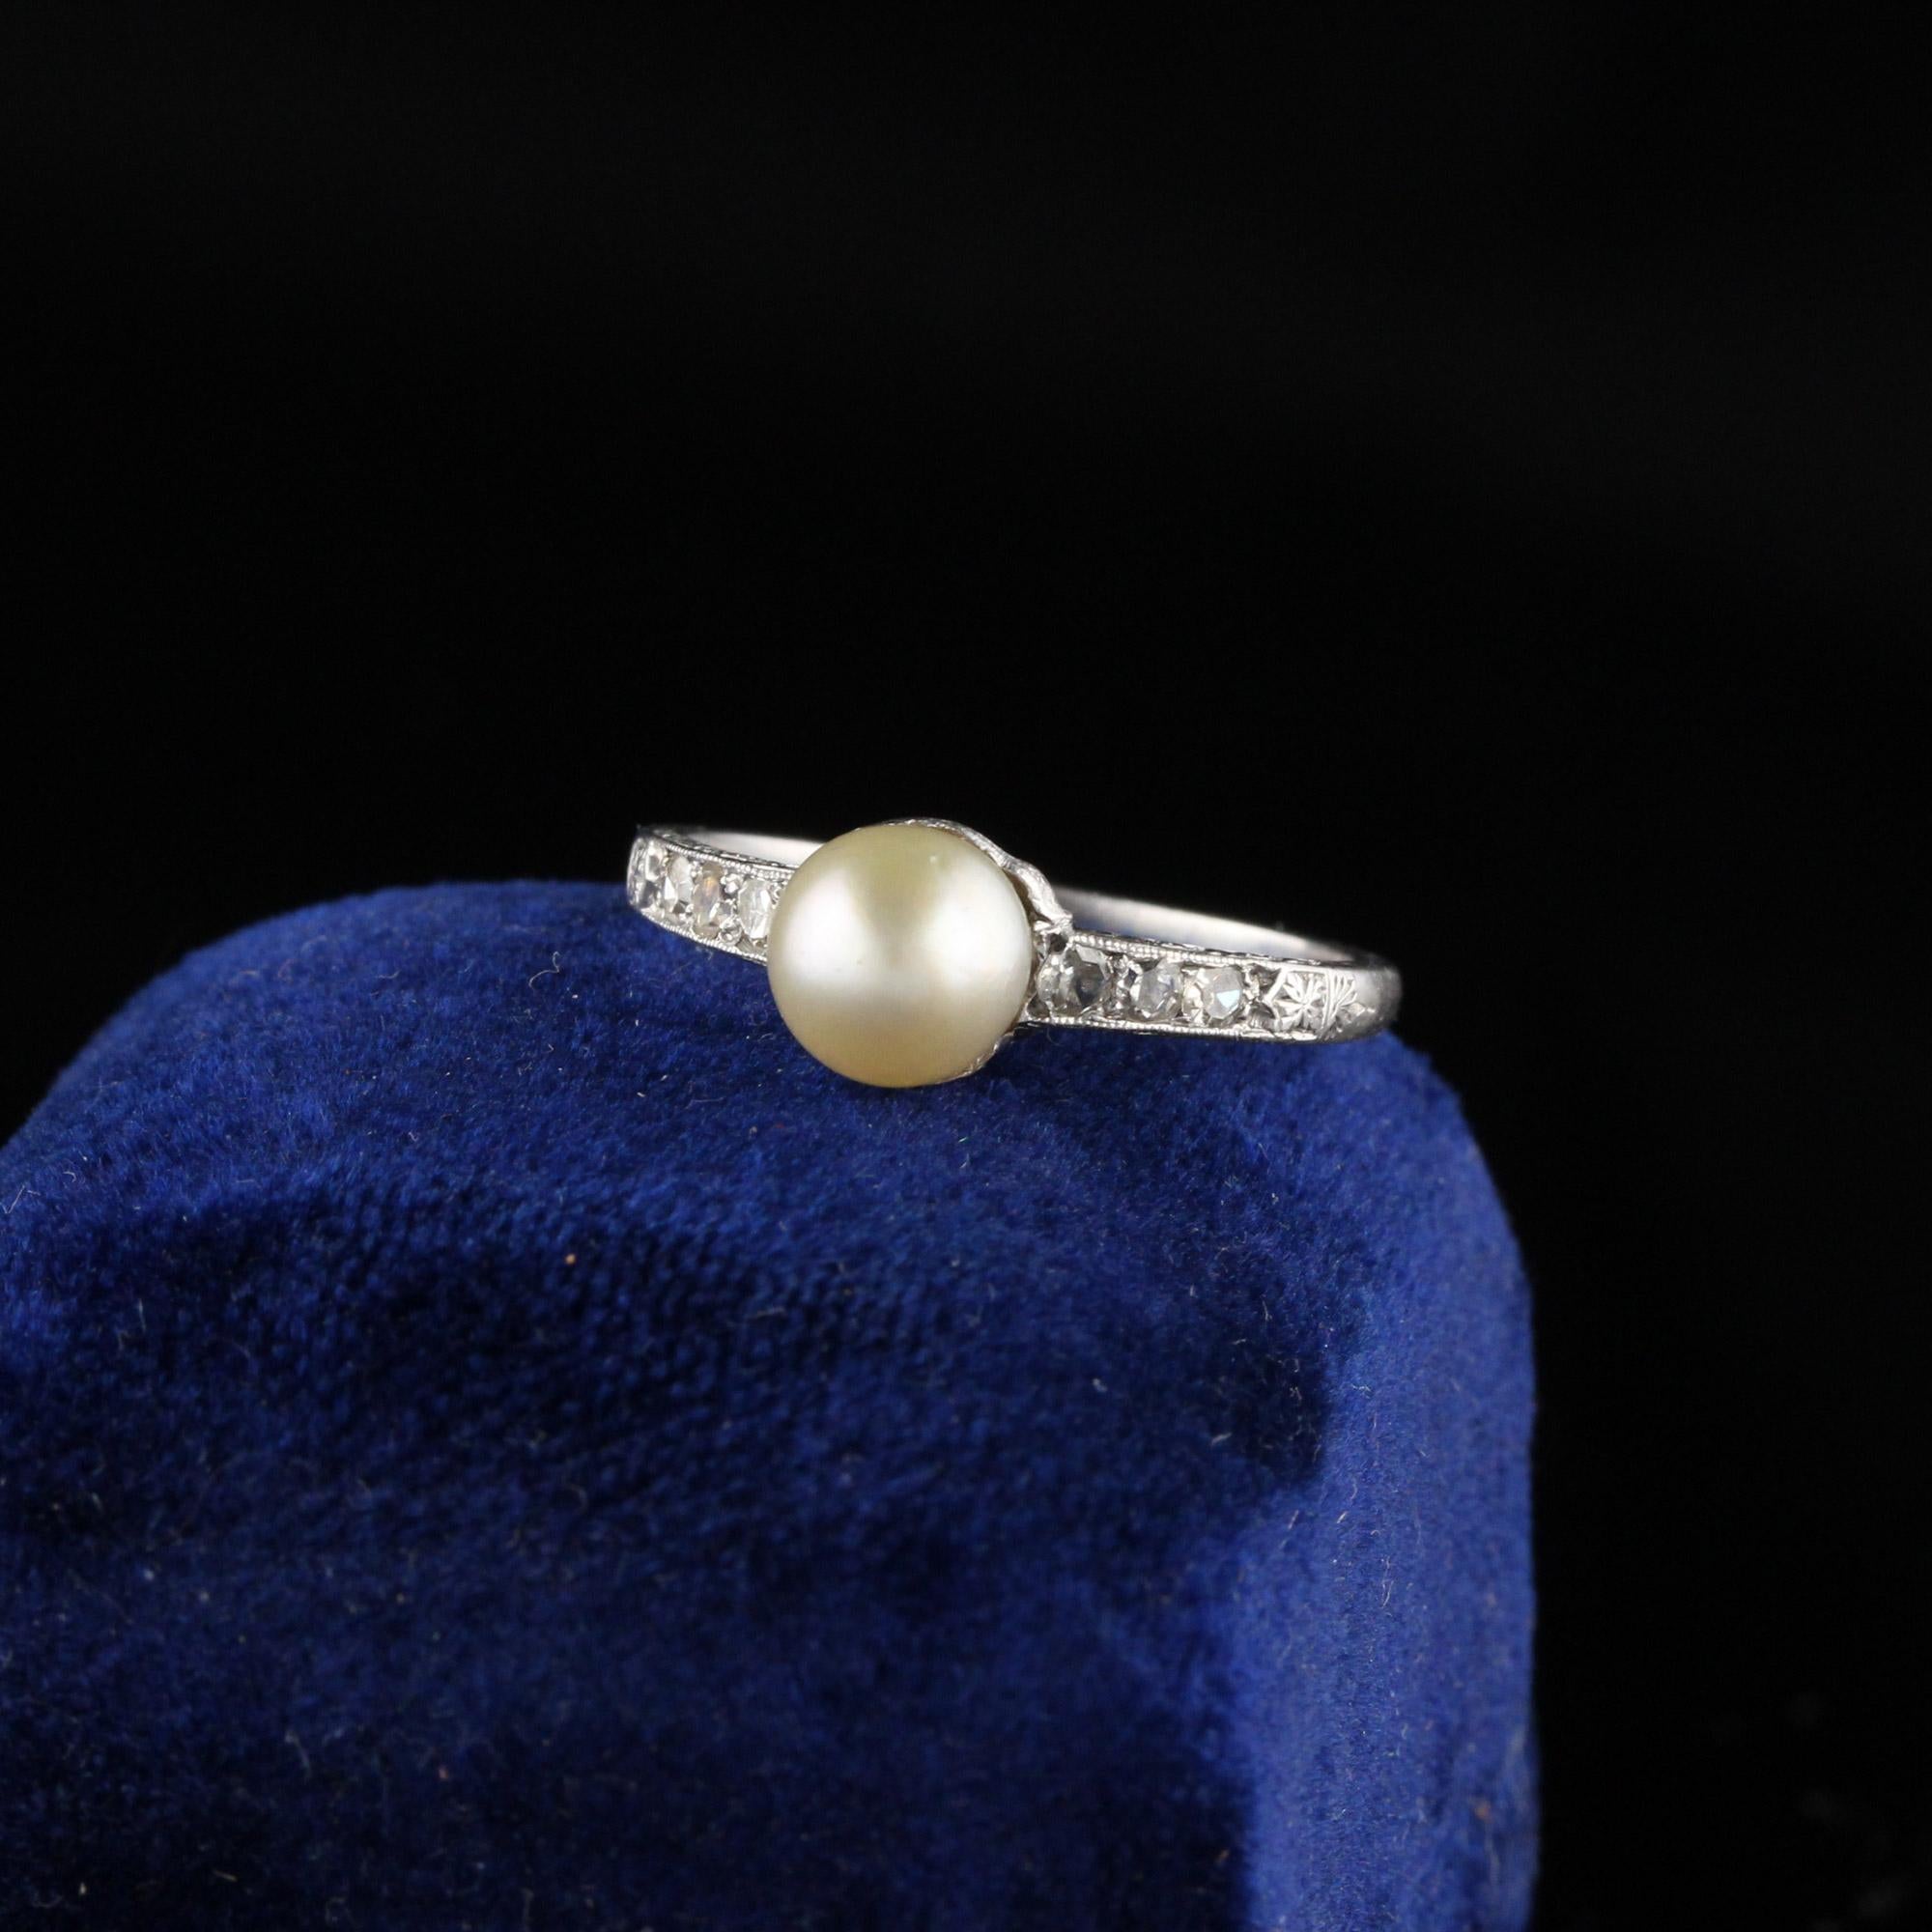 Beautiful Natural Pearl ring with 6 total diamonds. 

Item #R0465

Metal: Platinum 

Weight: 3.0 Grams

Total Diamond Weight: Approximately 0.20 cts

Diamond Color: H

Diamond Clarity: SI2

Natural Pearl Measurement: 6.2 mm

Ring Size: 6.0 

This